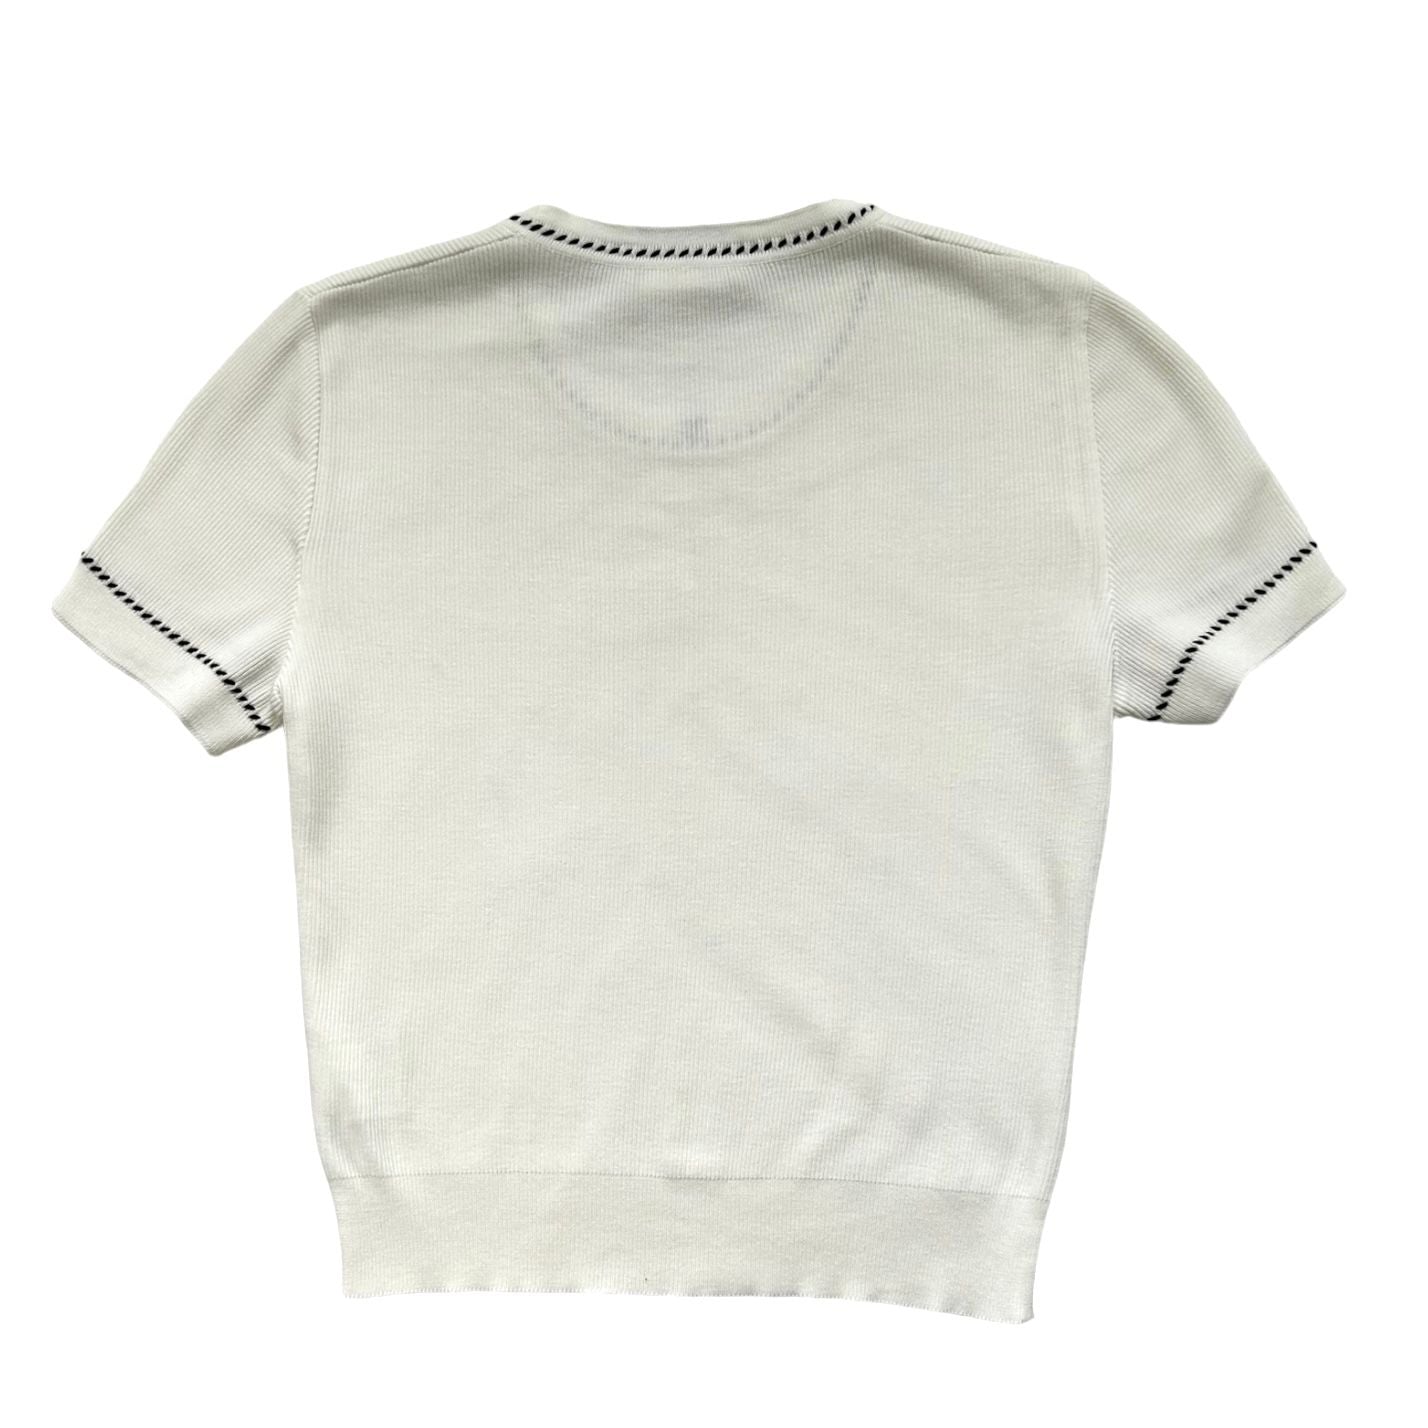 Chanel White Ribbed Logo Top